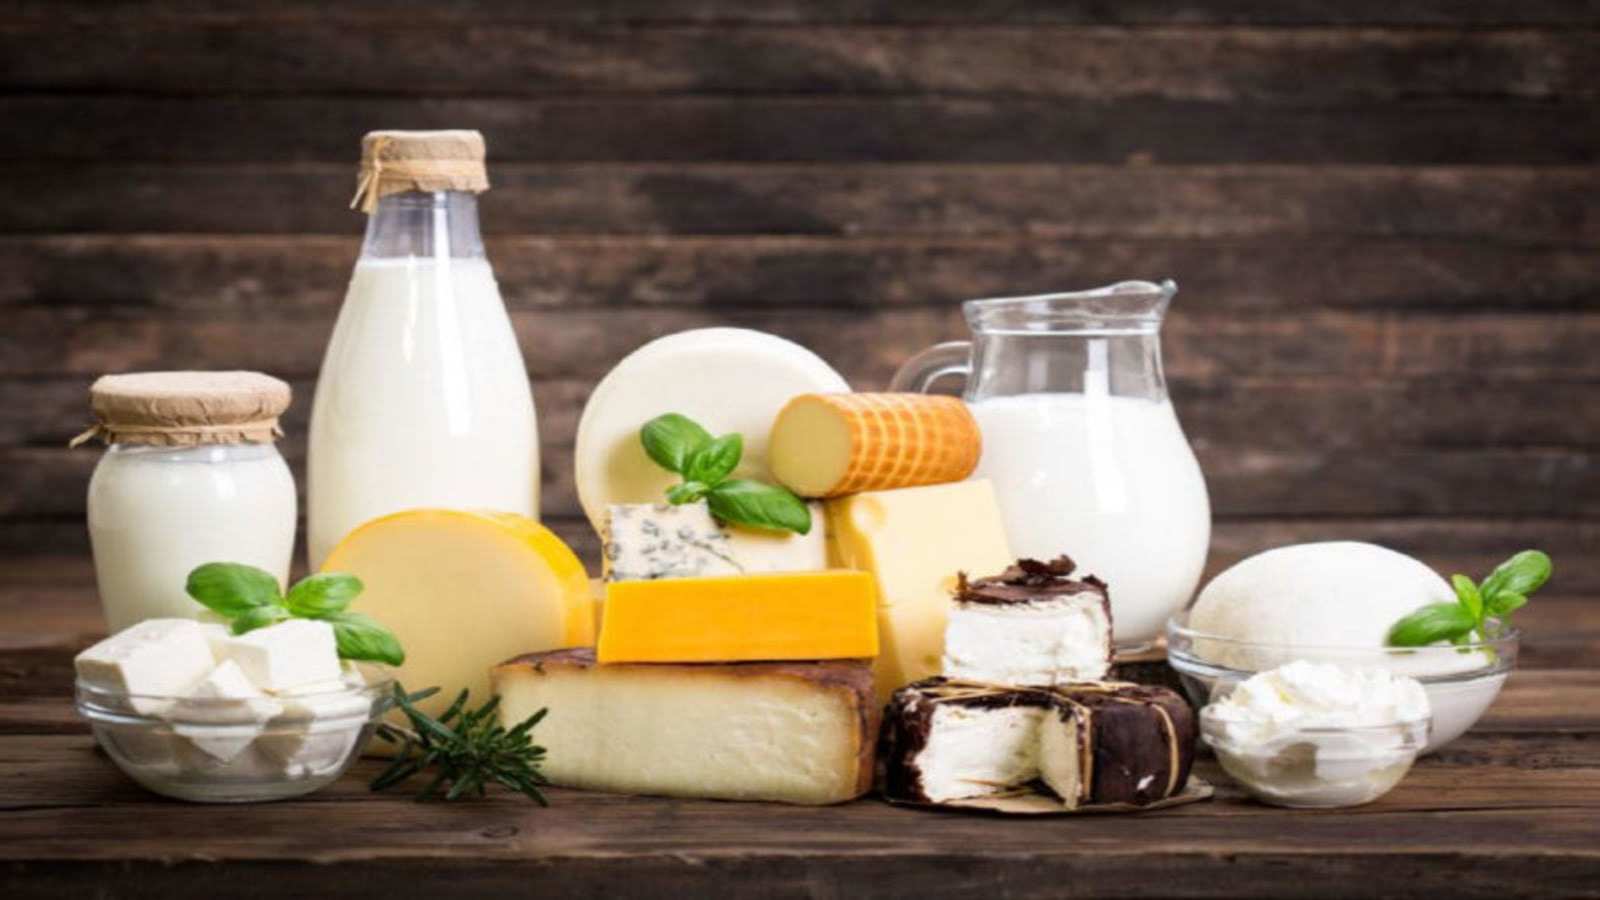 European Union boosts Cameroon’s dairy processing capacity with US$11.77m